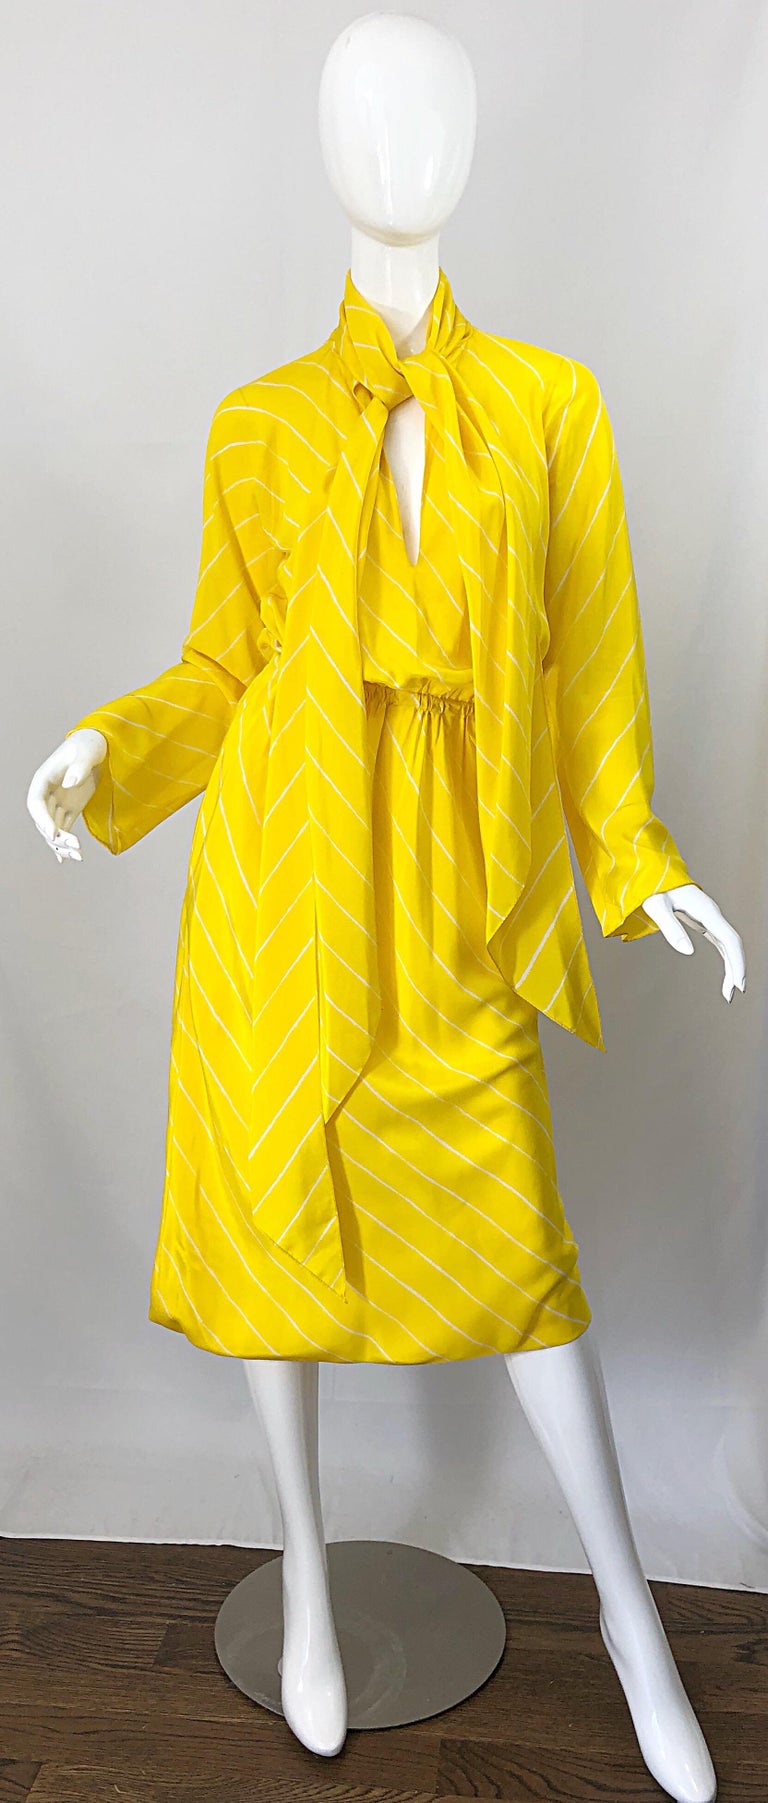 1970s Halston Canary Yellow + White Chevron Striped Bell Sleeve 70s Scarf Dress For Sale 2